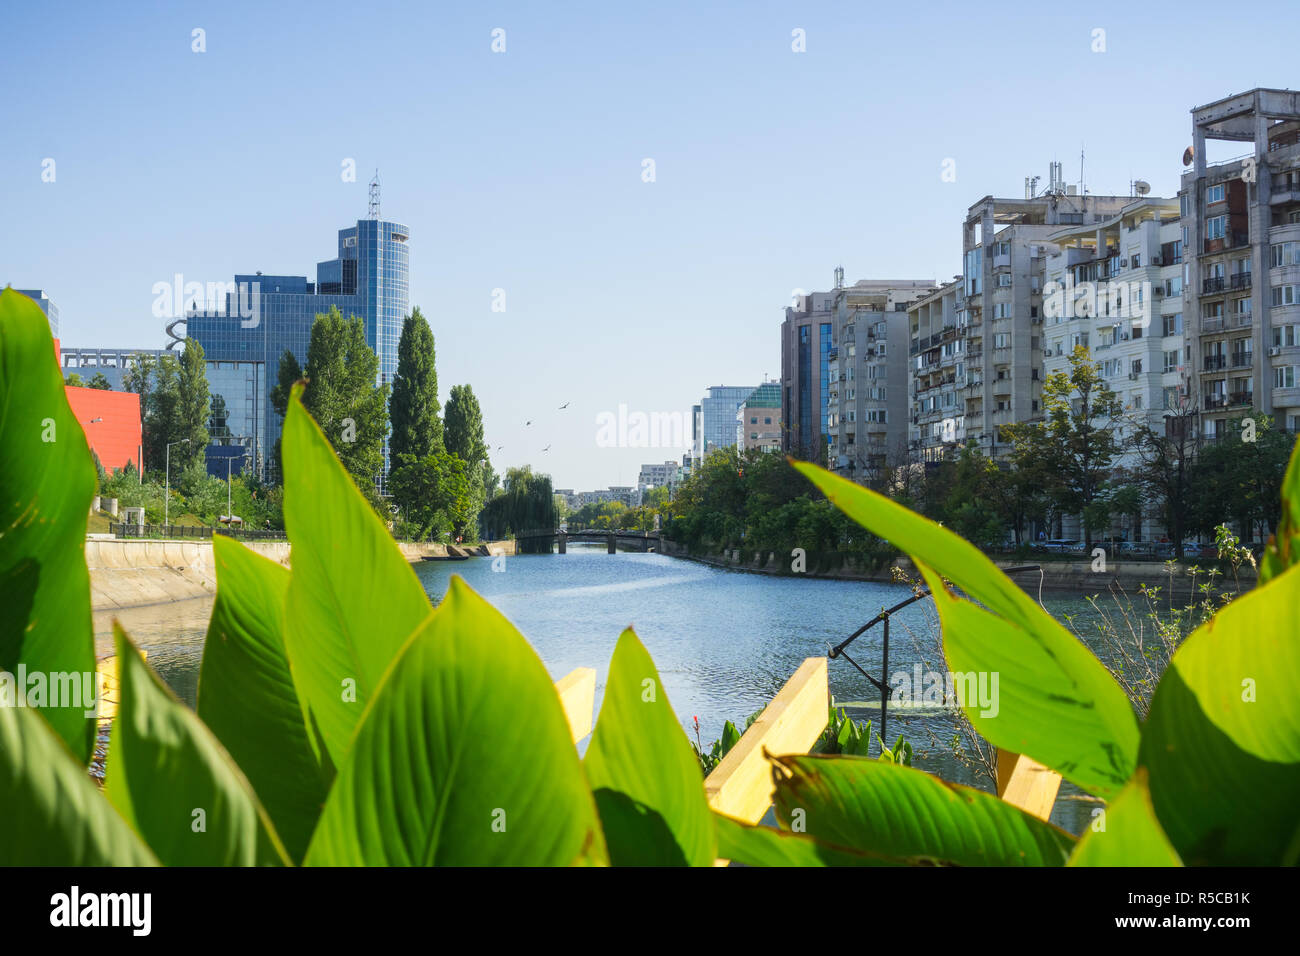 Dambovita river in downtown Bucharest; residential and office buildings on its shoreline, Romania Stock Photo